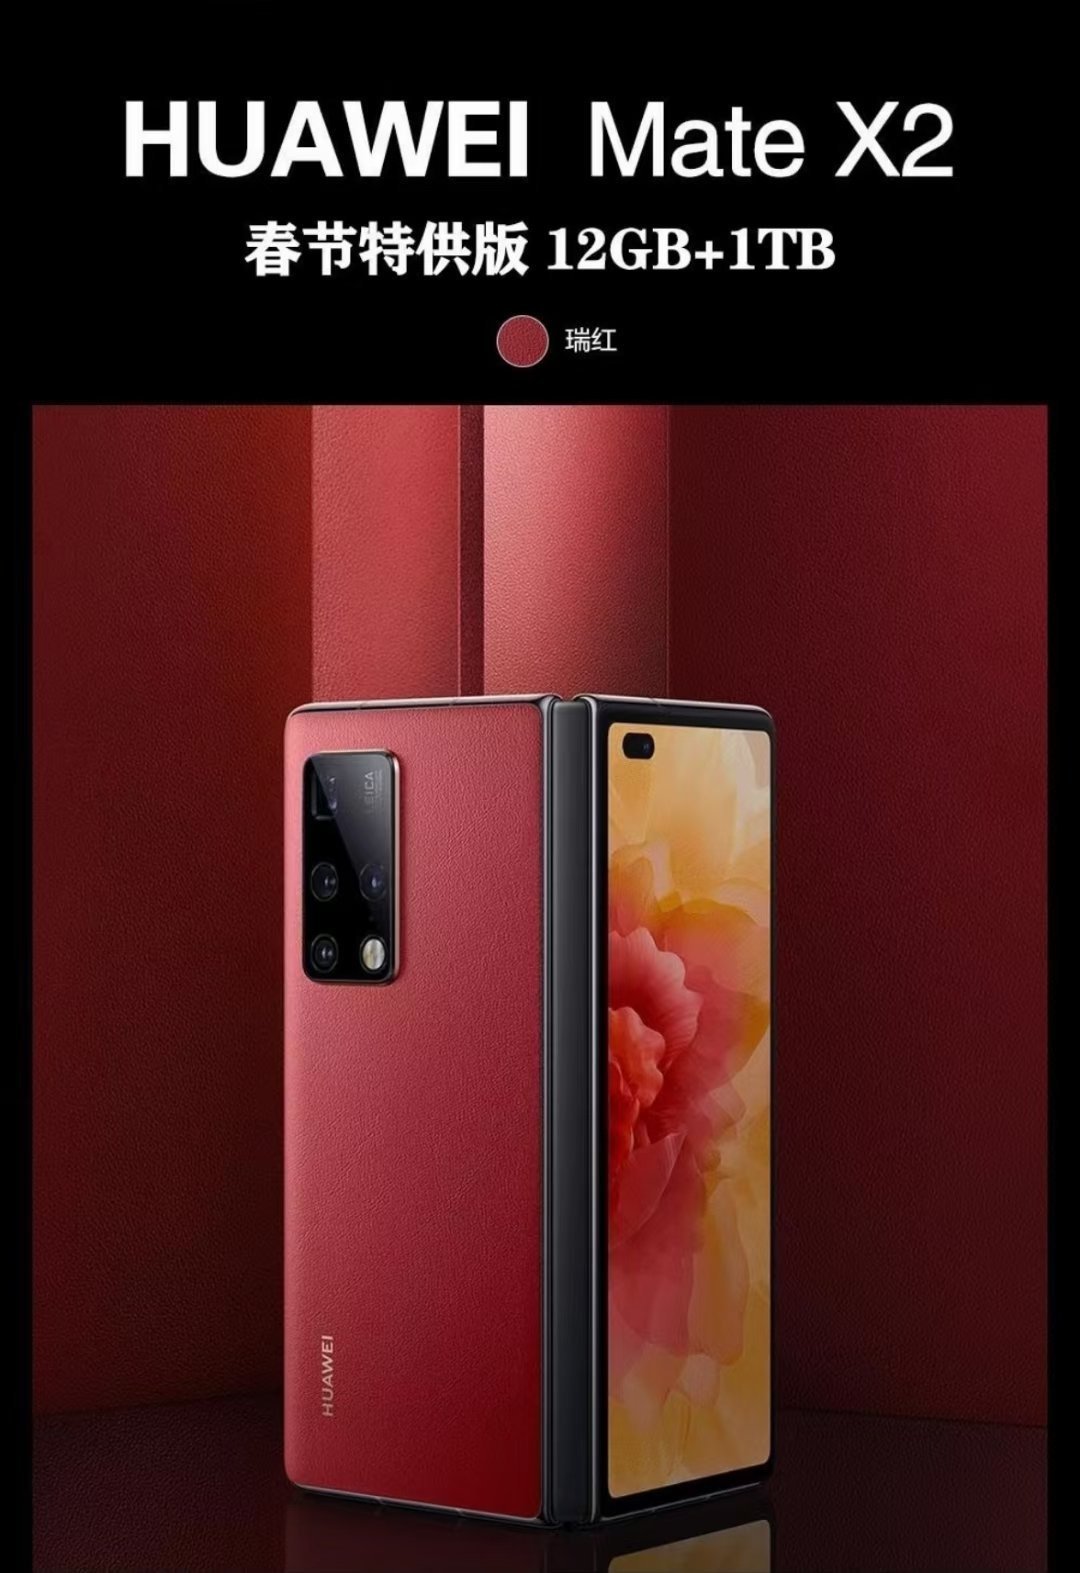 Huawei-Mate-X2-Red-Promo-Poster